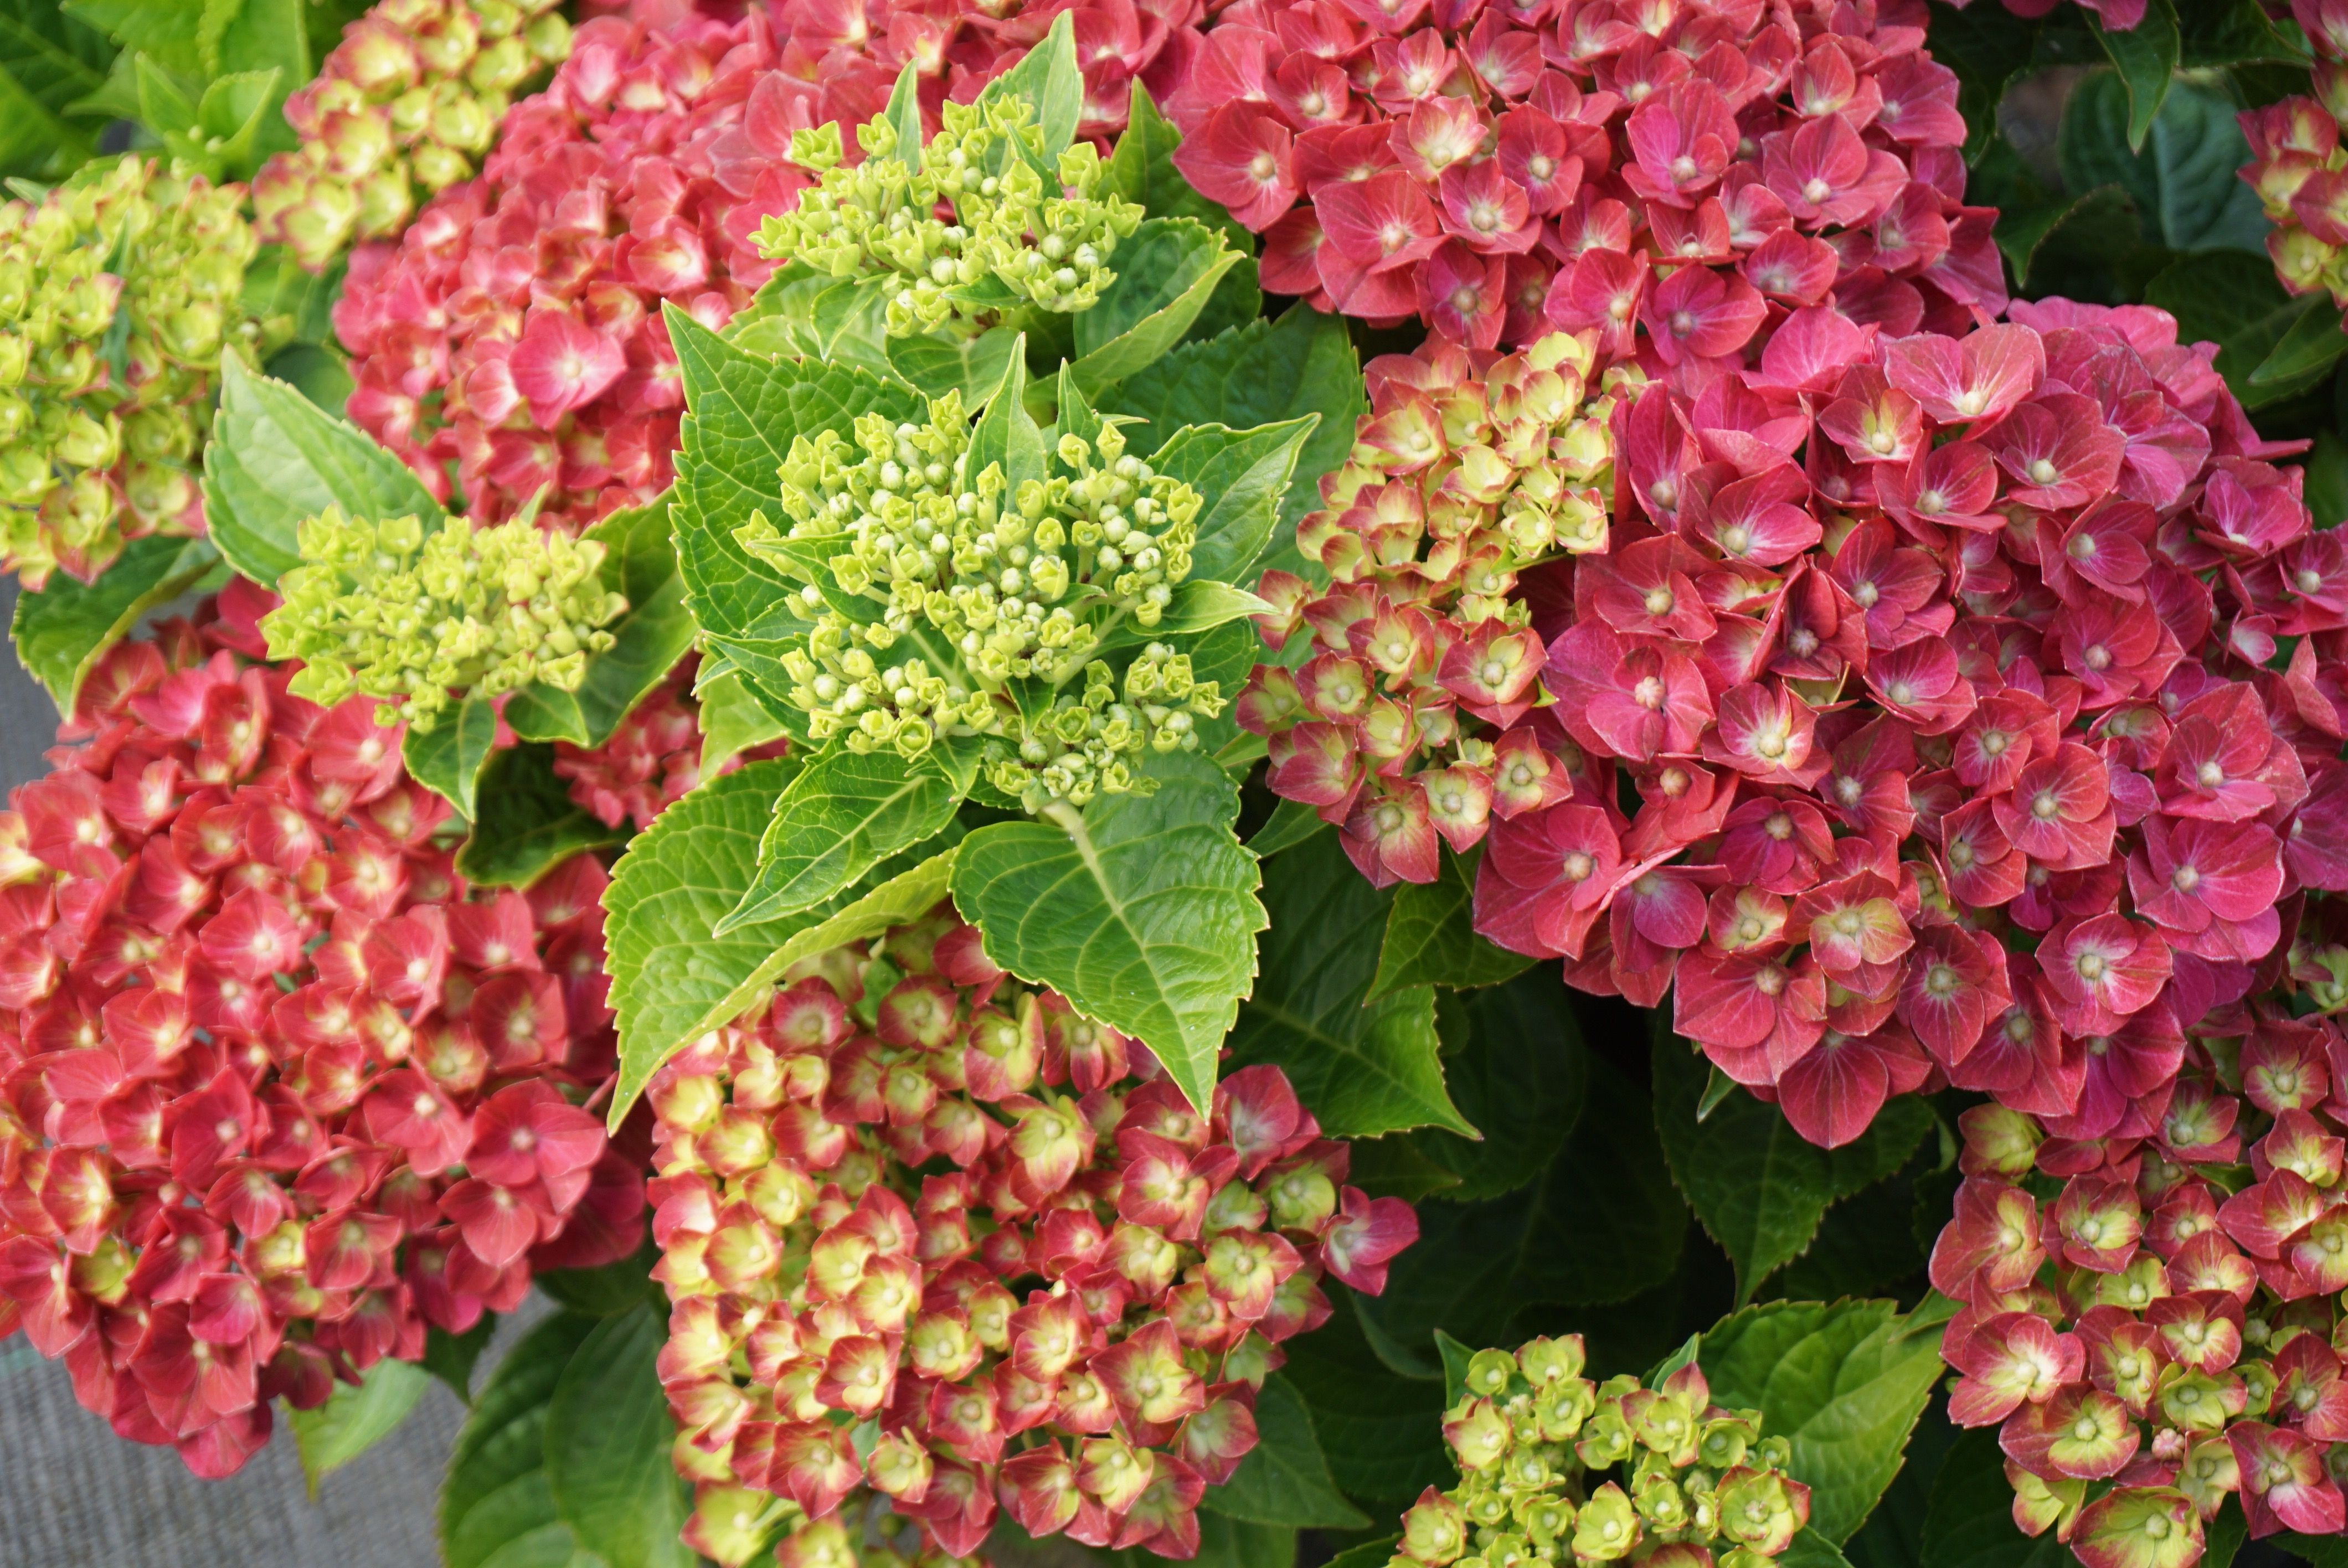 images/plants/hydrangea/hyd-magical-moulin-rouge/hyd-magical-moulin-rouge-0005.jpg